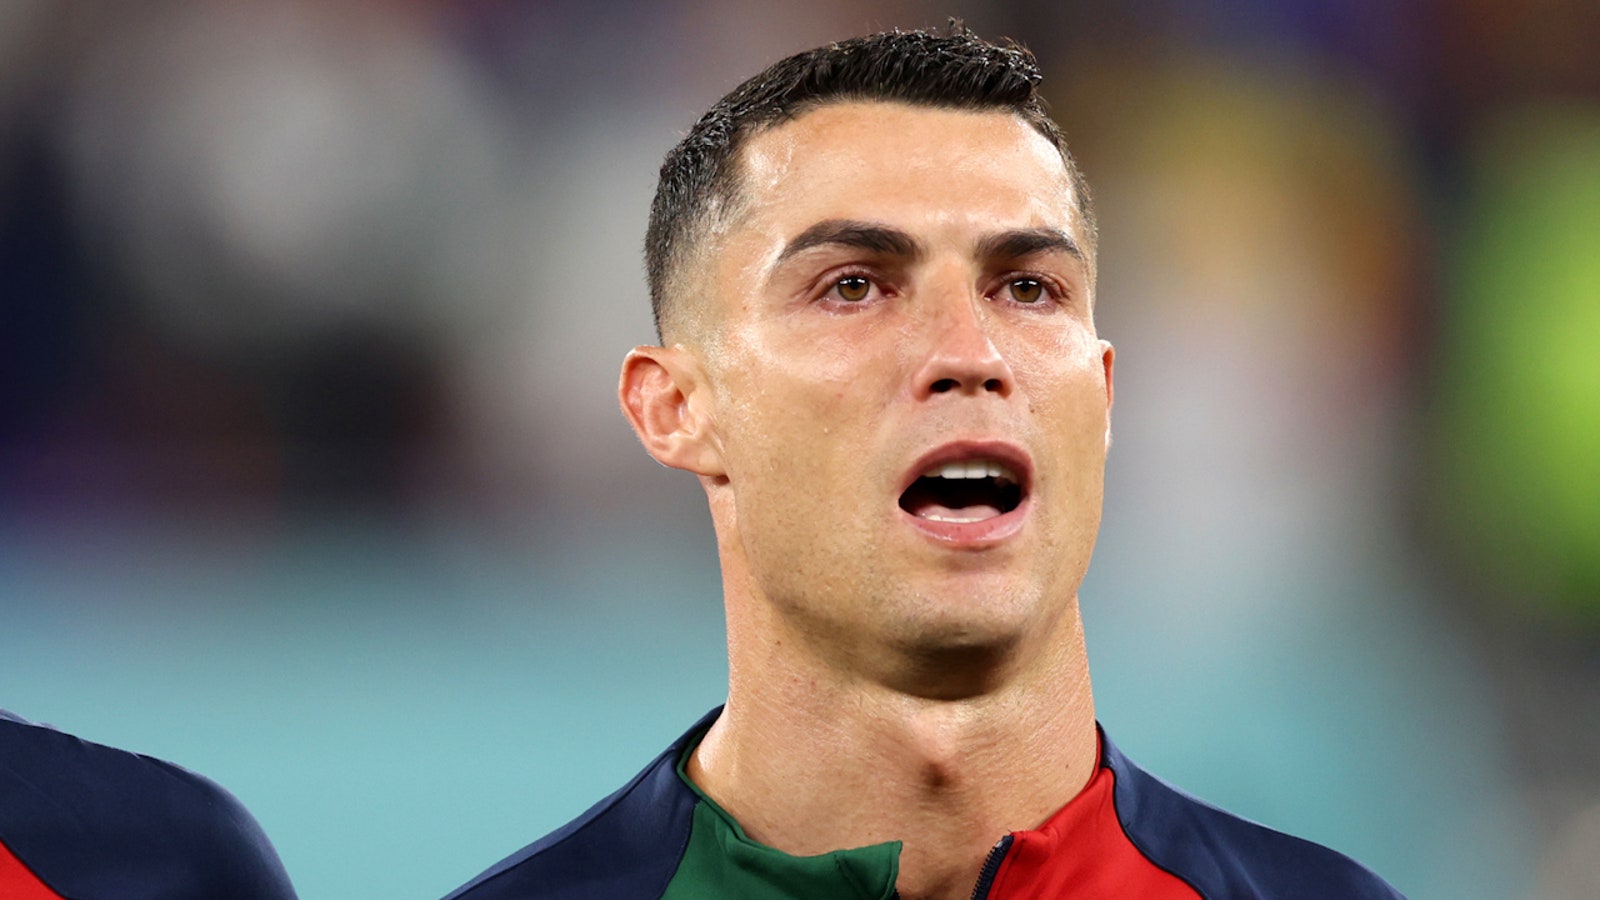 Cristiano Ronaldo tears up during Portugal's National Anthem